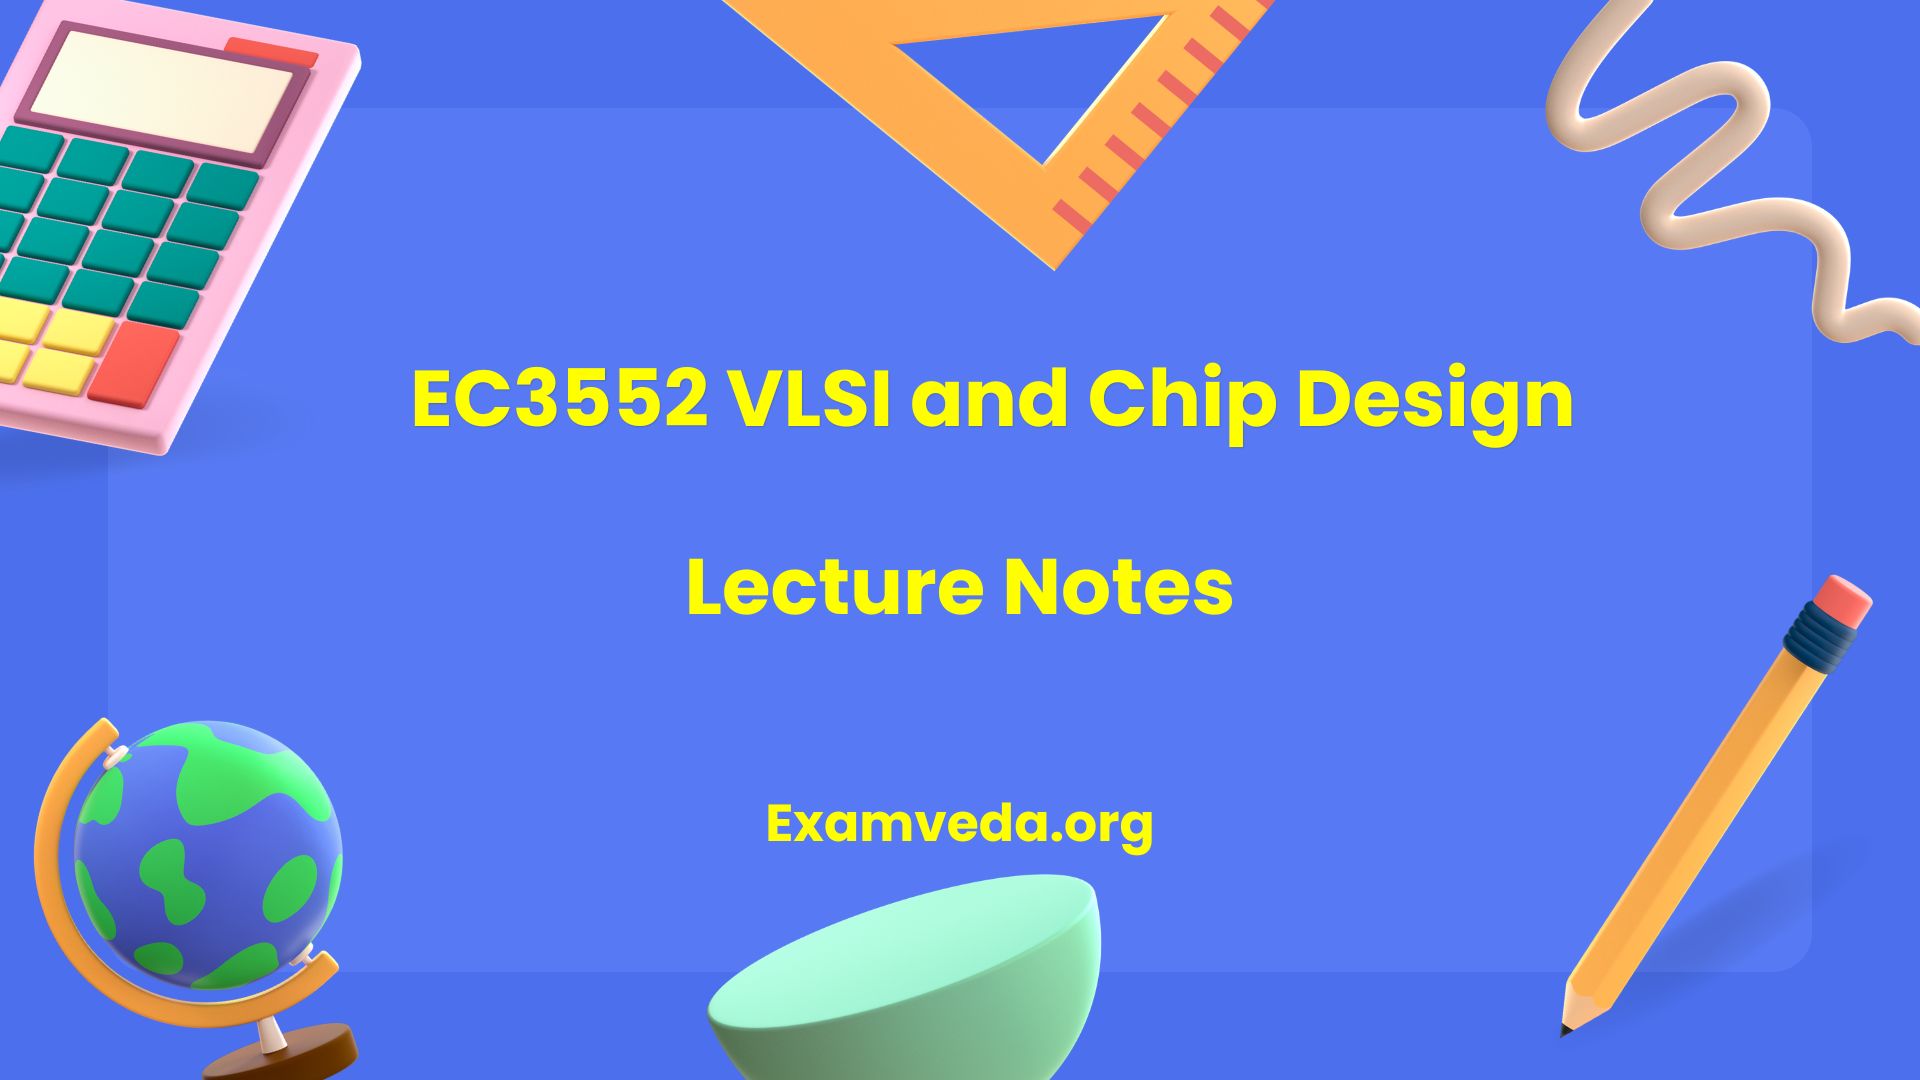 EC3552 VLSI and Chip Design Lecture Notes